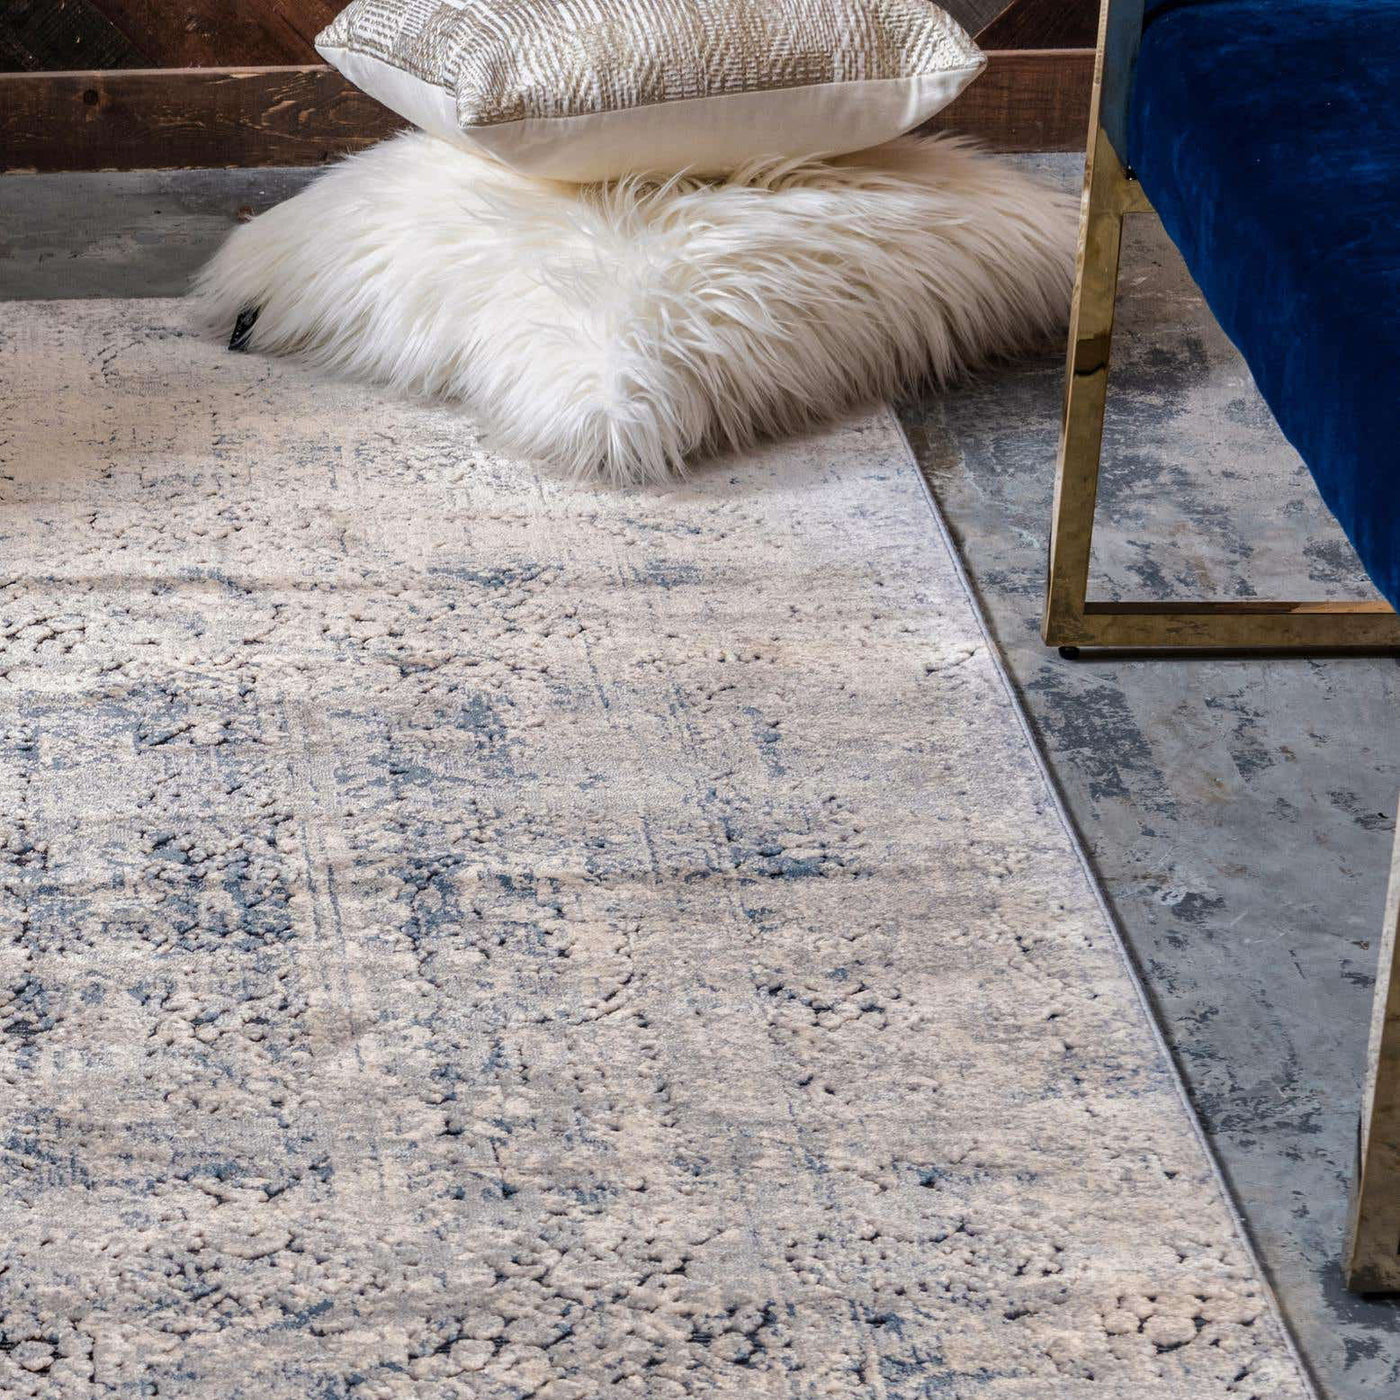 How to choose an area rug in five easy steps by Interiors DBK